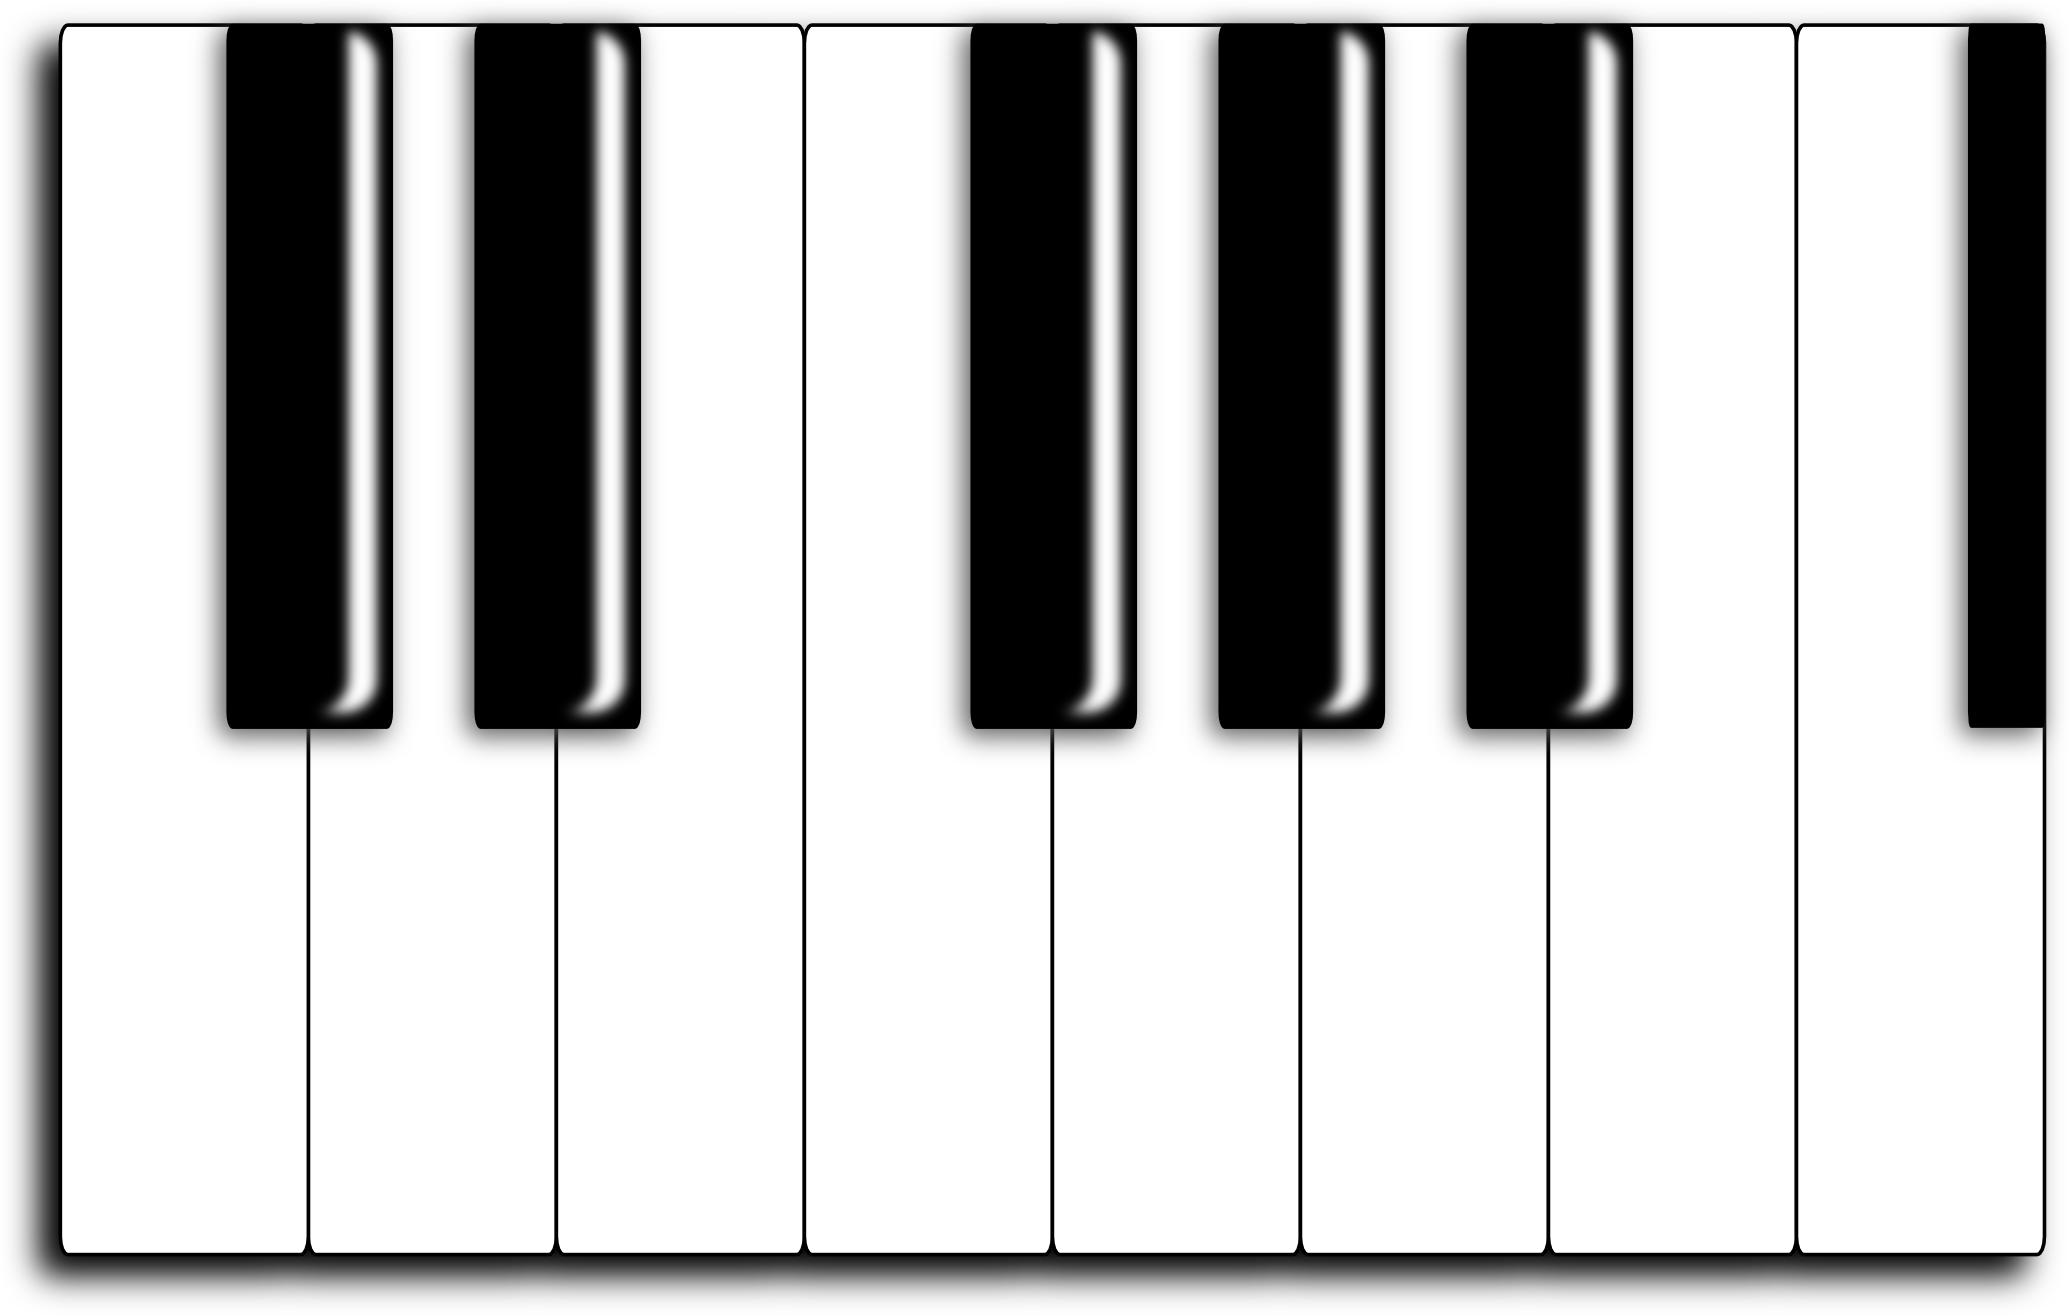 Wavy Piano Keys Clipart | Clipart library - Free Clipart Images